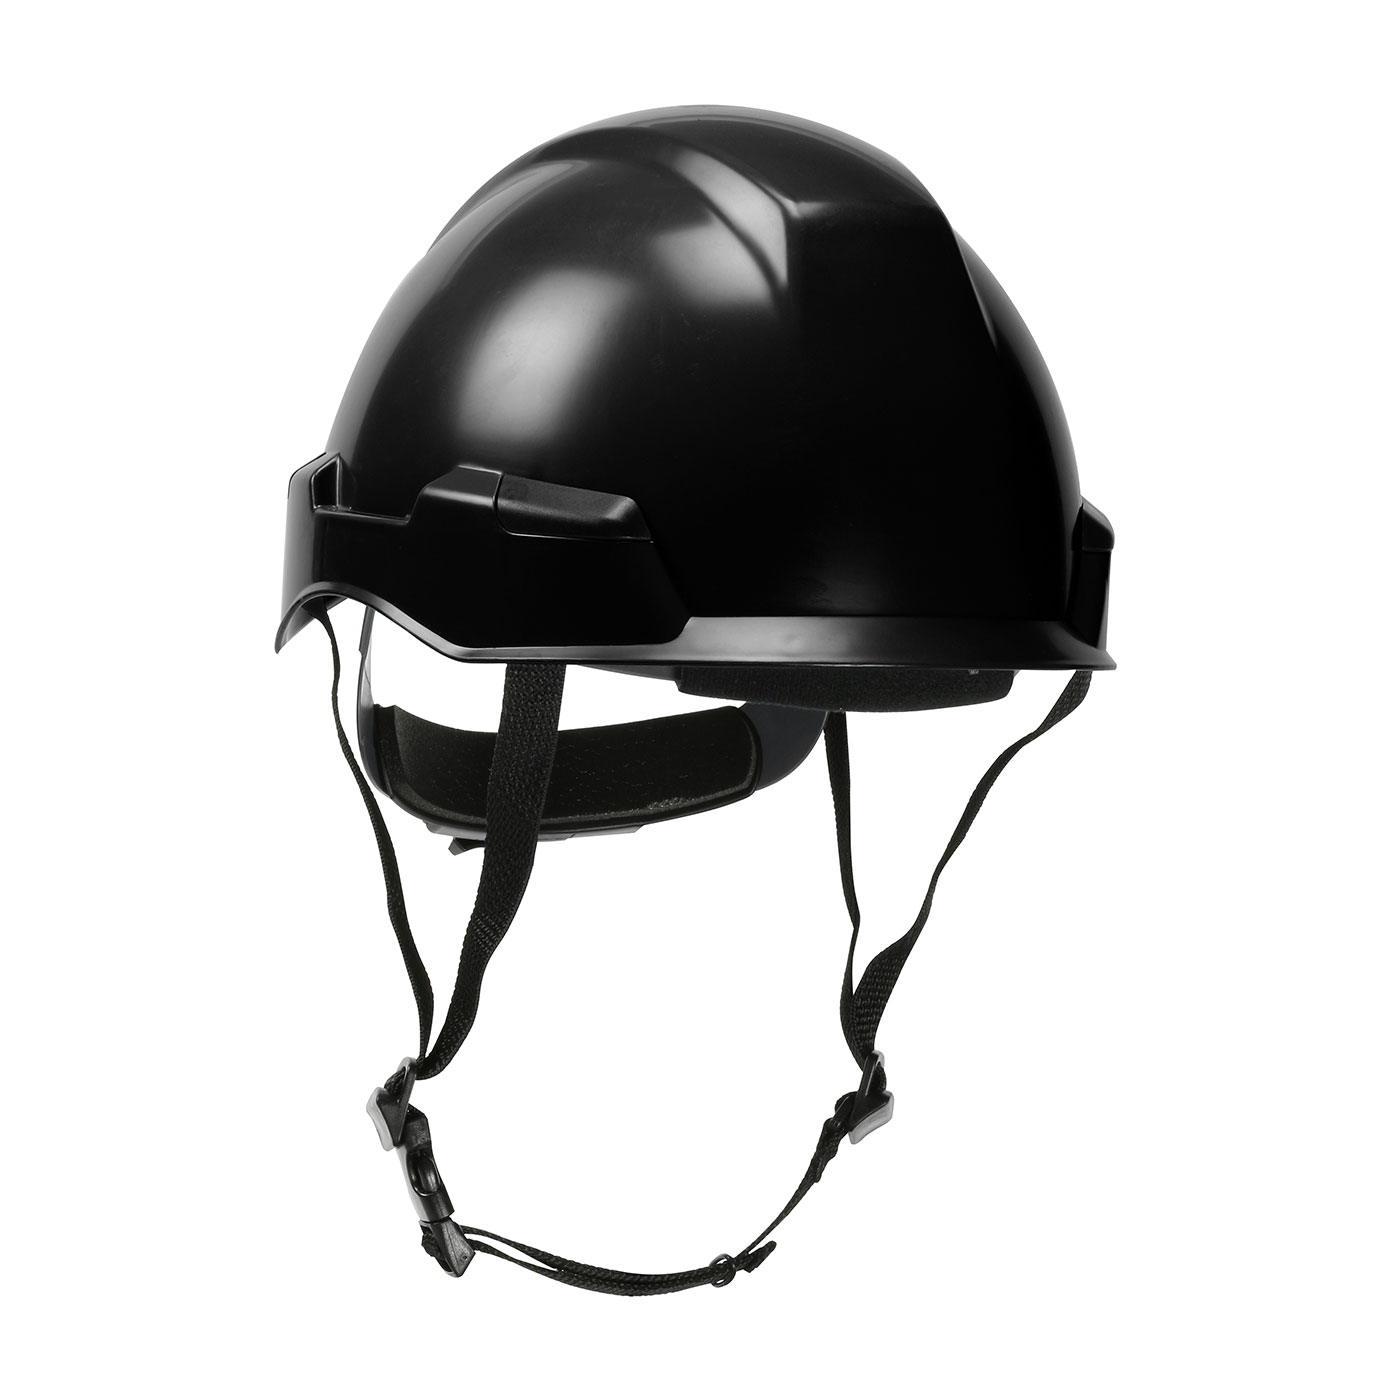 280-HP142R PIP® Dynamic Rocky™ Industrial Climbing Helmet with Polycarbonate / ABS Shell, Hi-Density Foam Impact Liner, Nylon Suspension, Wheel Ratchet Adjustment and 4-Point Chin Strap- Black